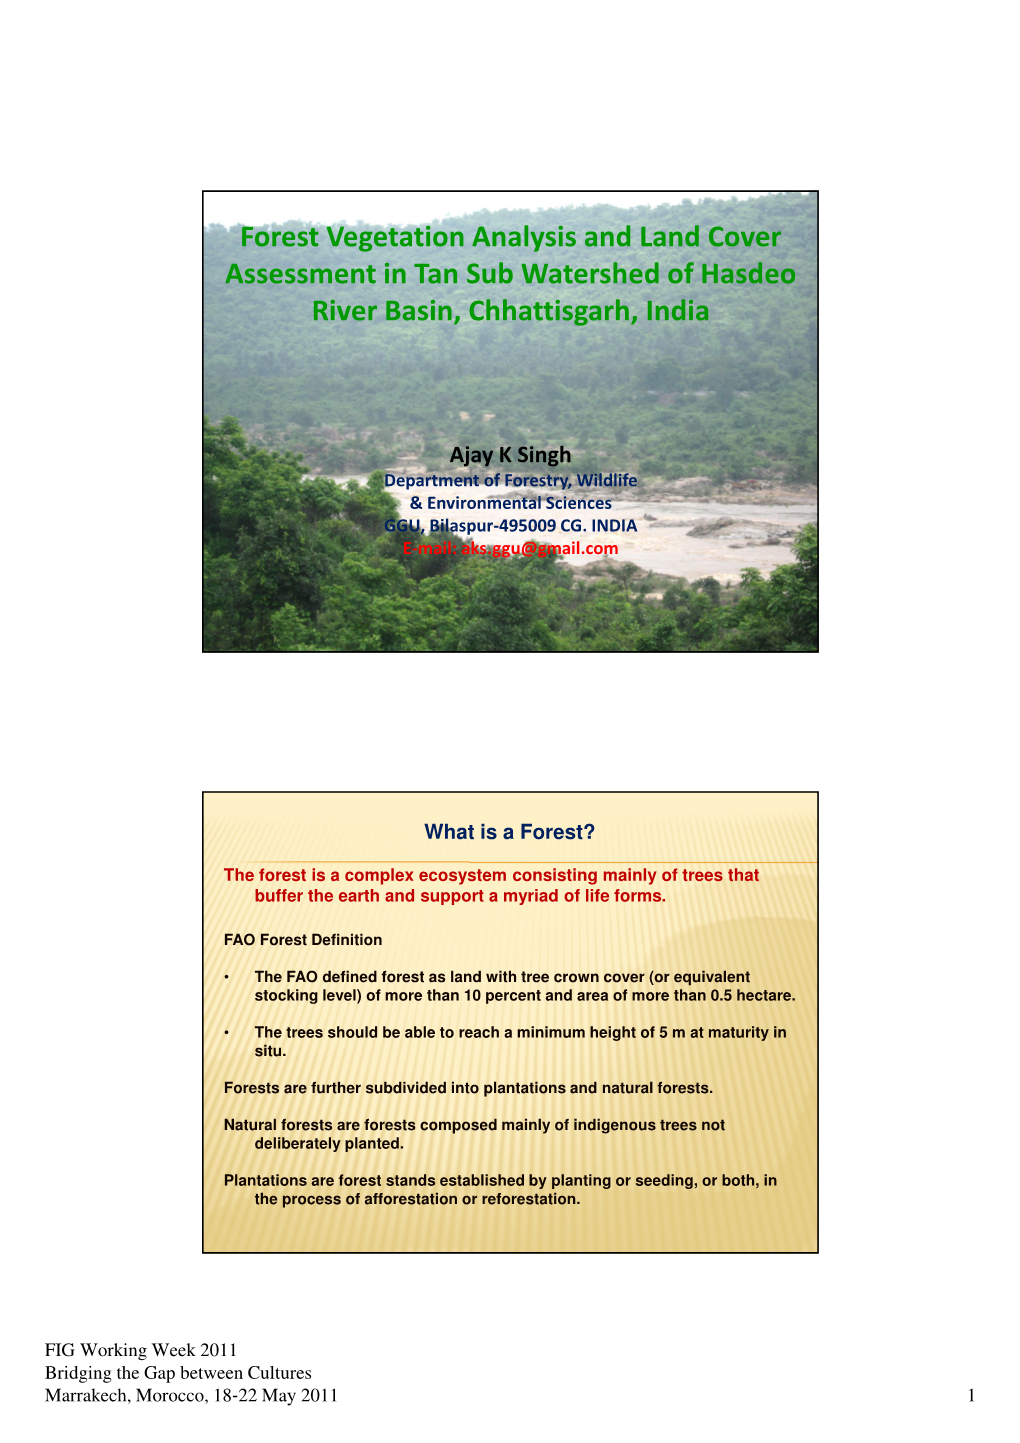 Forest Vegetation Analysis and Land Cover Assessment in Tan Sub Watershed of Hasdeo River Basin, Chhattisgarh, India